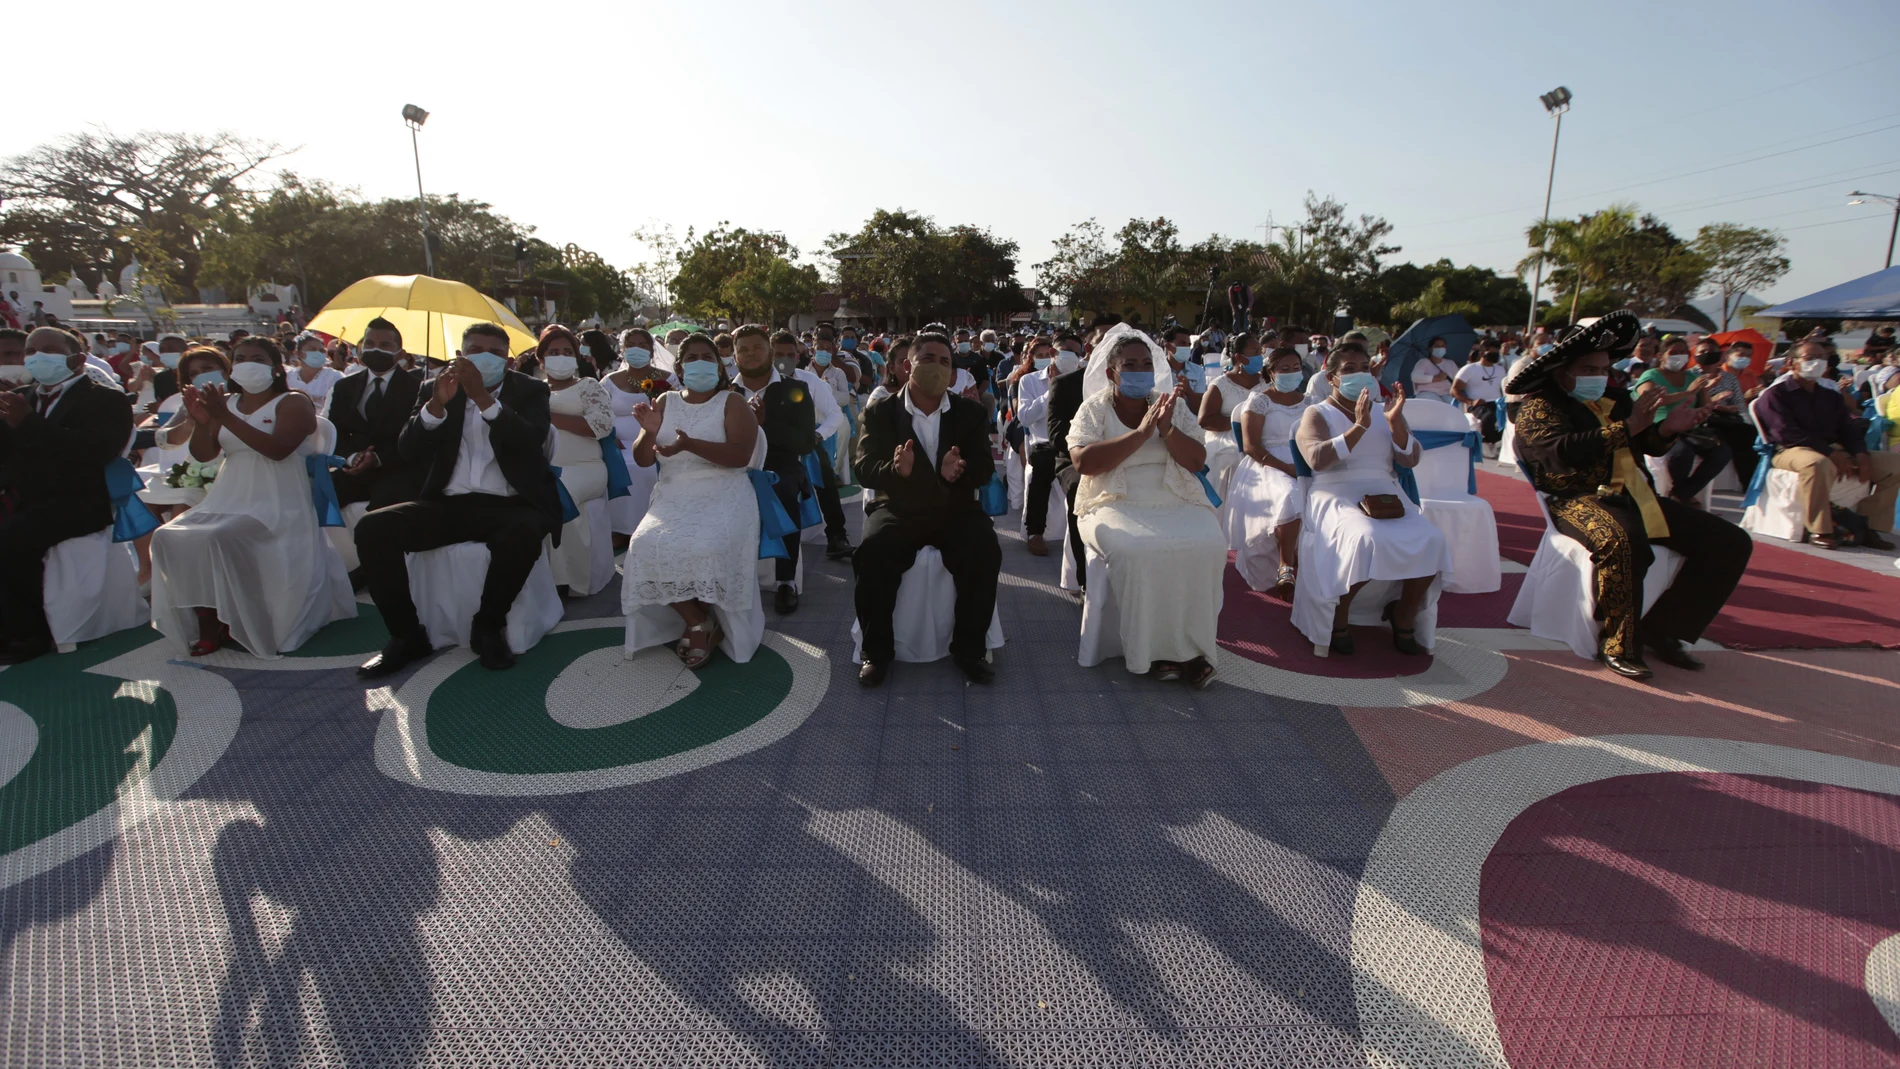 Couples sit together during a mass wedding in Managua, Nicaragua, Sunday, Feb 14, 2021. Around 400 couples said "I do" on Valentine's Day during the mass wedding. (AP Photo/Diana Ulloa)